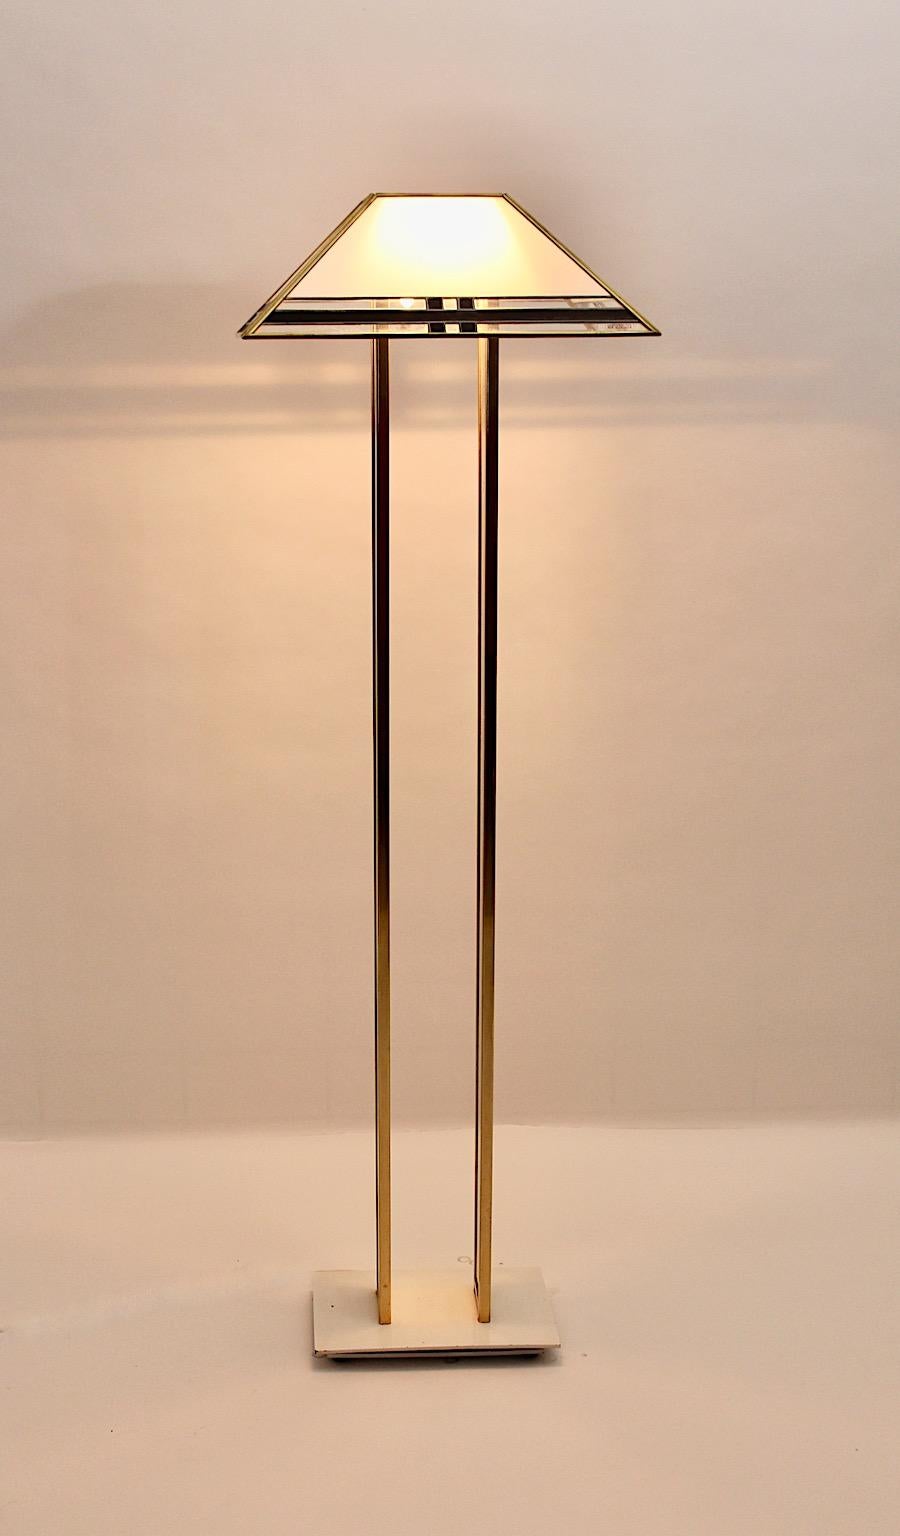 Italian Modern Hollywood Regency style vintage floor lamp from metal, lucite and plexiglass by Albano Poli for Poliarte 1970s Italy.
The wonderful floor lamp by Albano Poli shows a removable lamp shade with brass plated metal, black and white